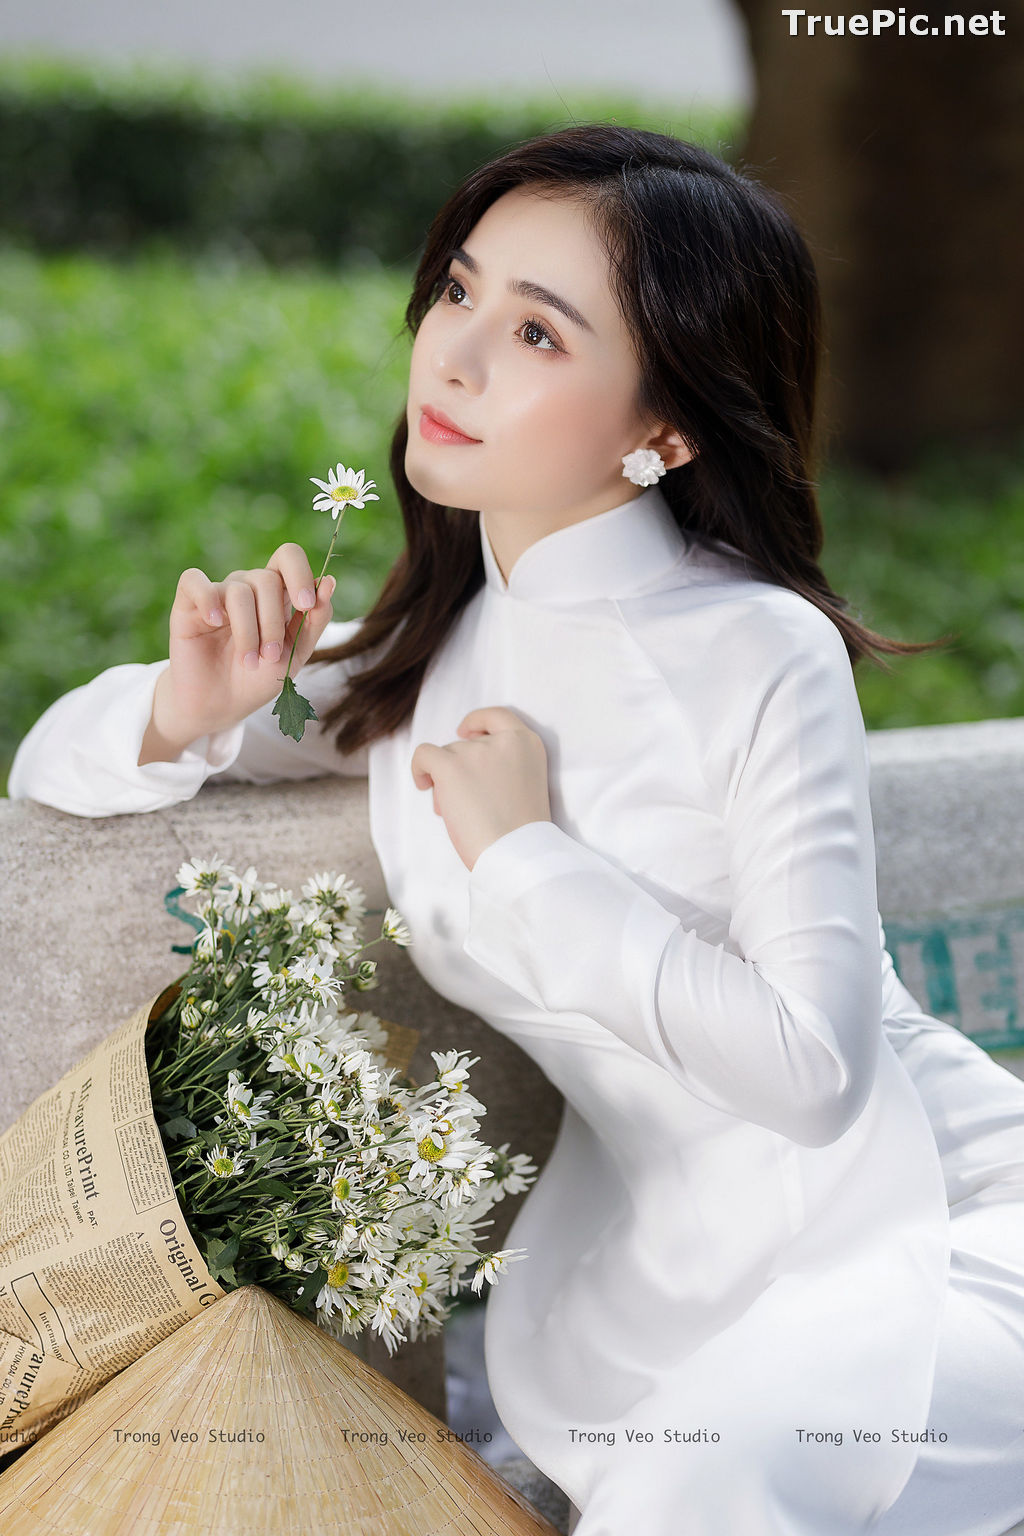 Image The Beauty of Vietnamese Girls with Traditional Dress (Ao Dai) #4 - TruePic.net - Picture-39